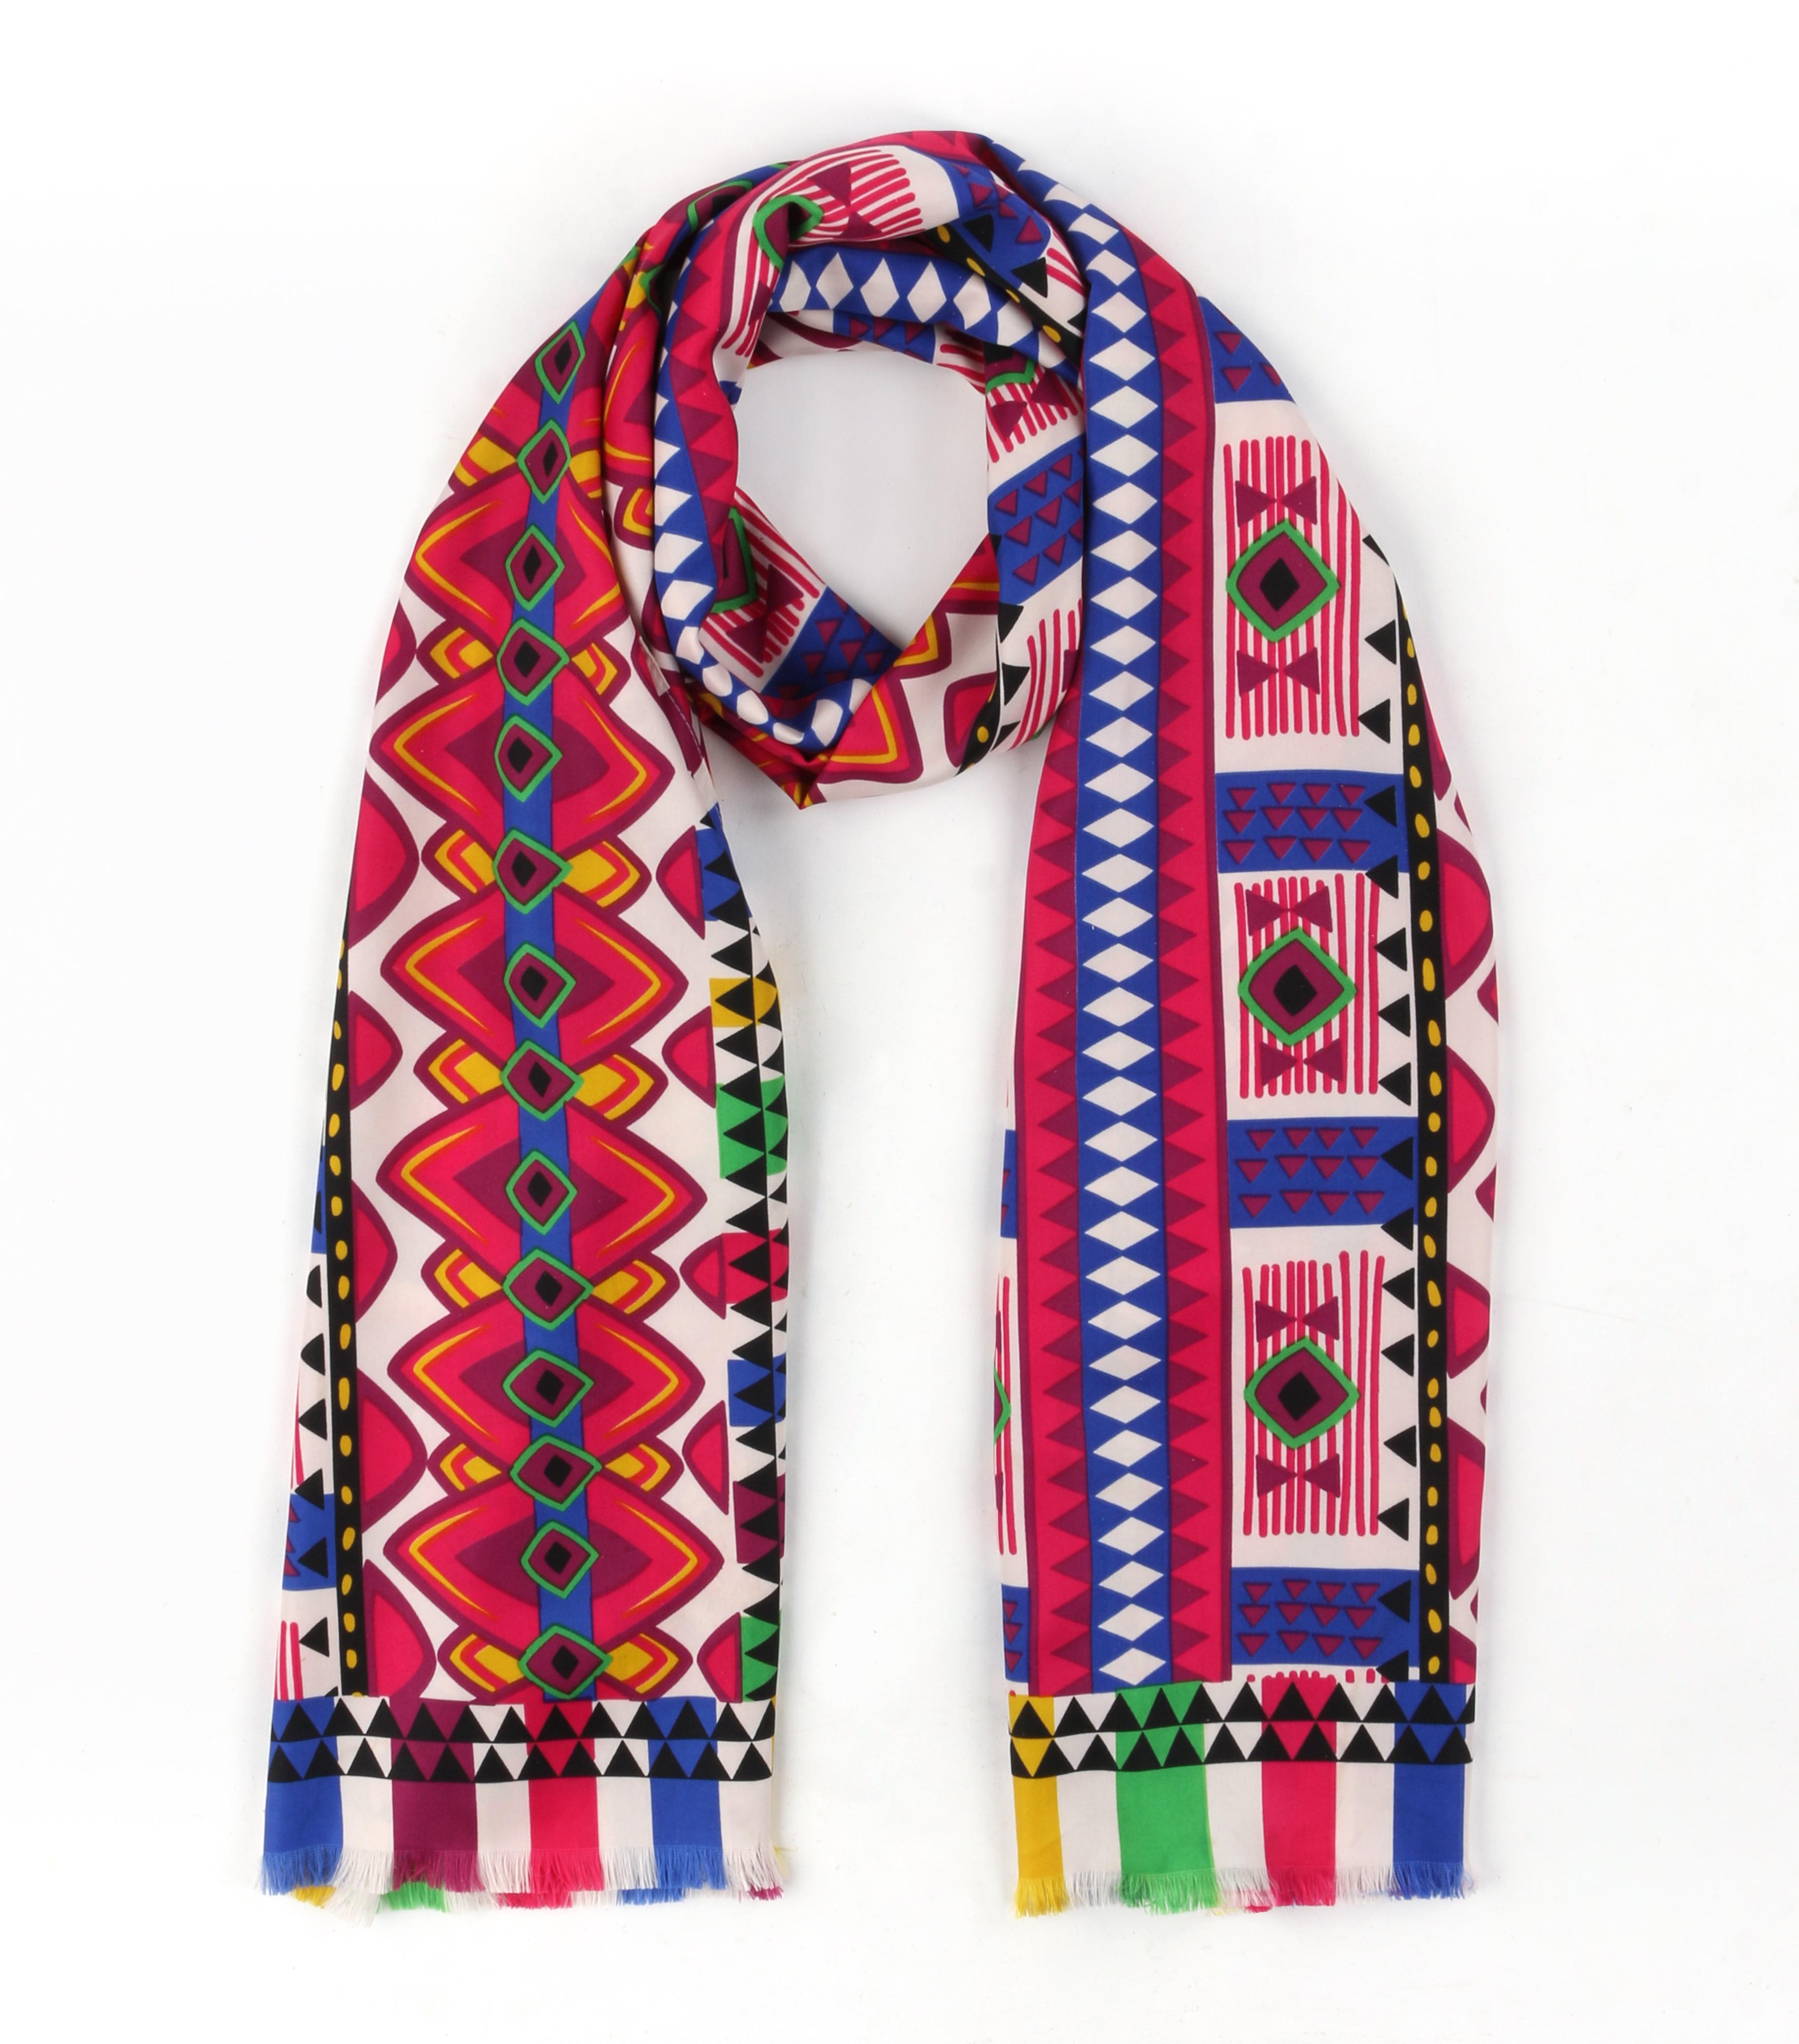 DESCRIPTION: ETRO Multicolor Geometric Tribal Print Silk Fringe Oblong Scarf
 
Brand / Manufacturer: Etro
Style: Oblong scarf
Color(s): Shades of pink, yellow, green, blue, purple, black, and white
Lined: No
Marked Fabric Content: 100% Silk
Unmarked